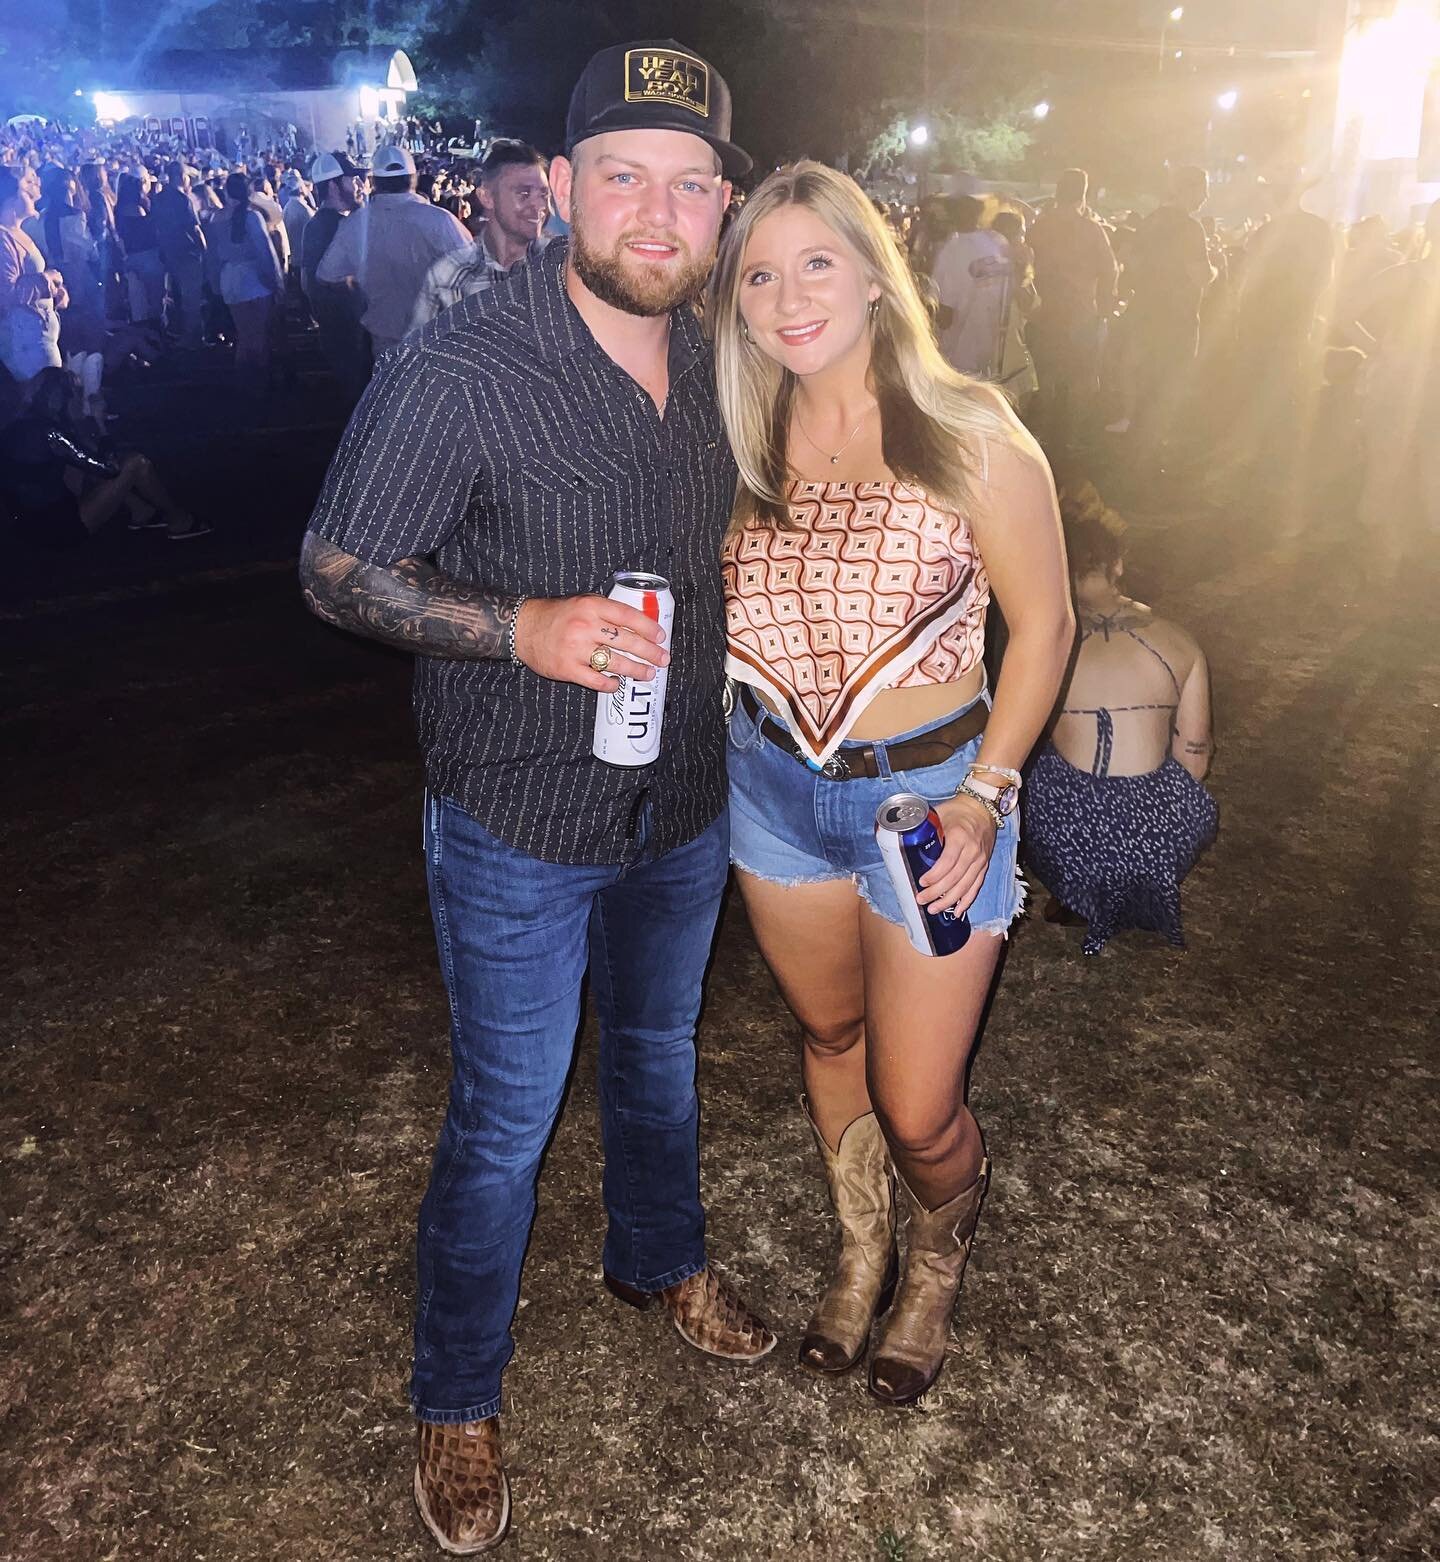 Good times at @codyjohnson this past weekend with my people! #lucchesse